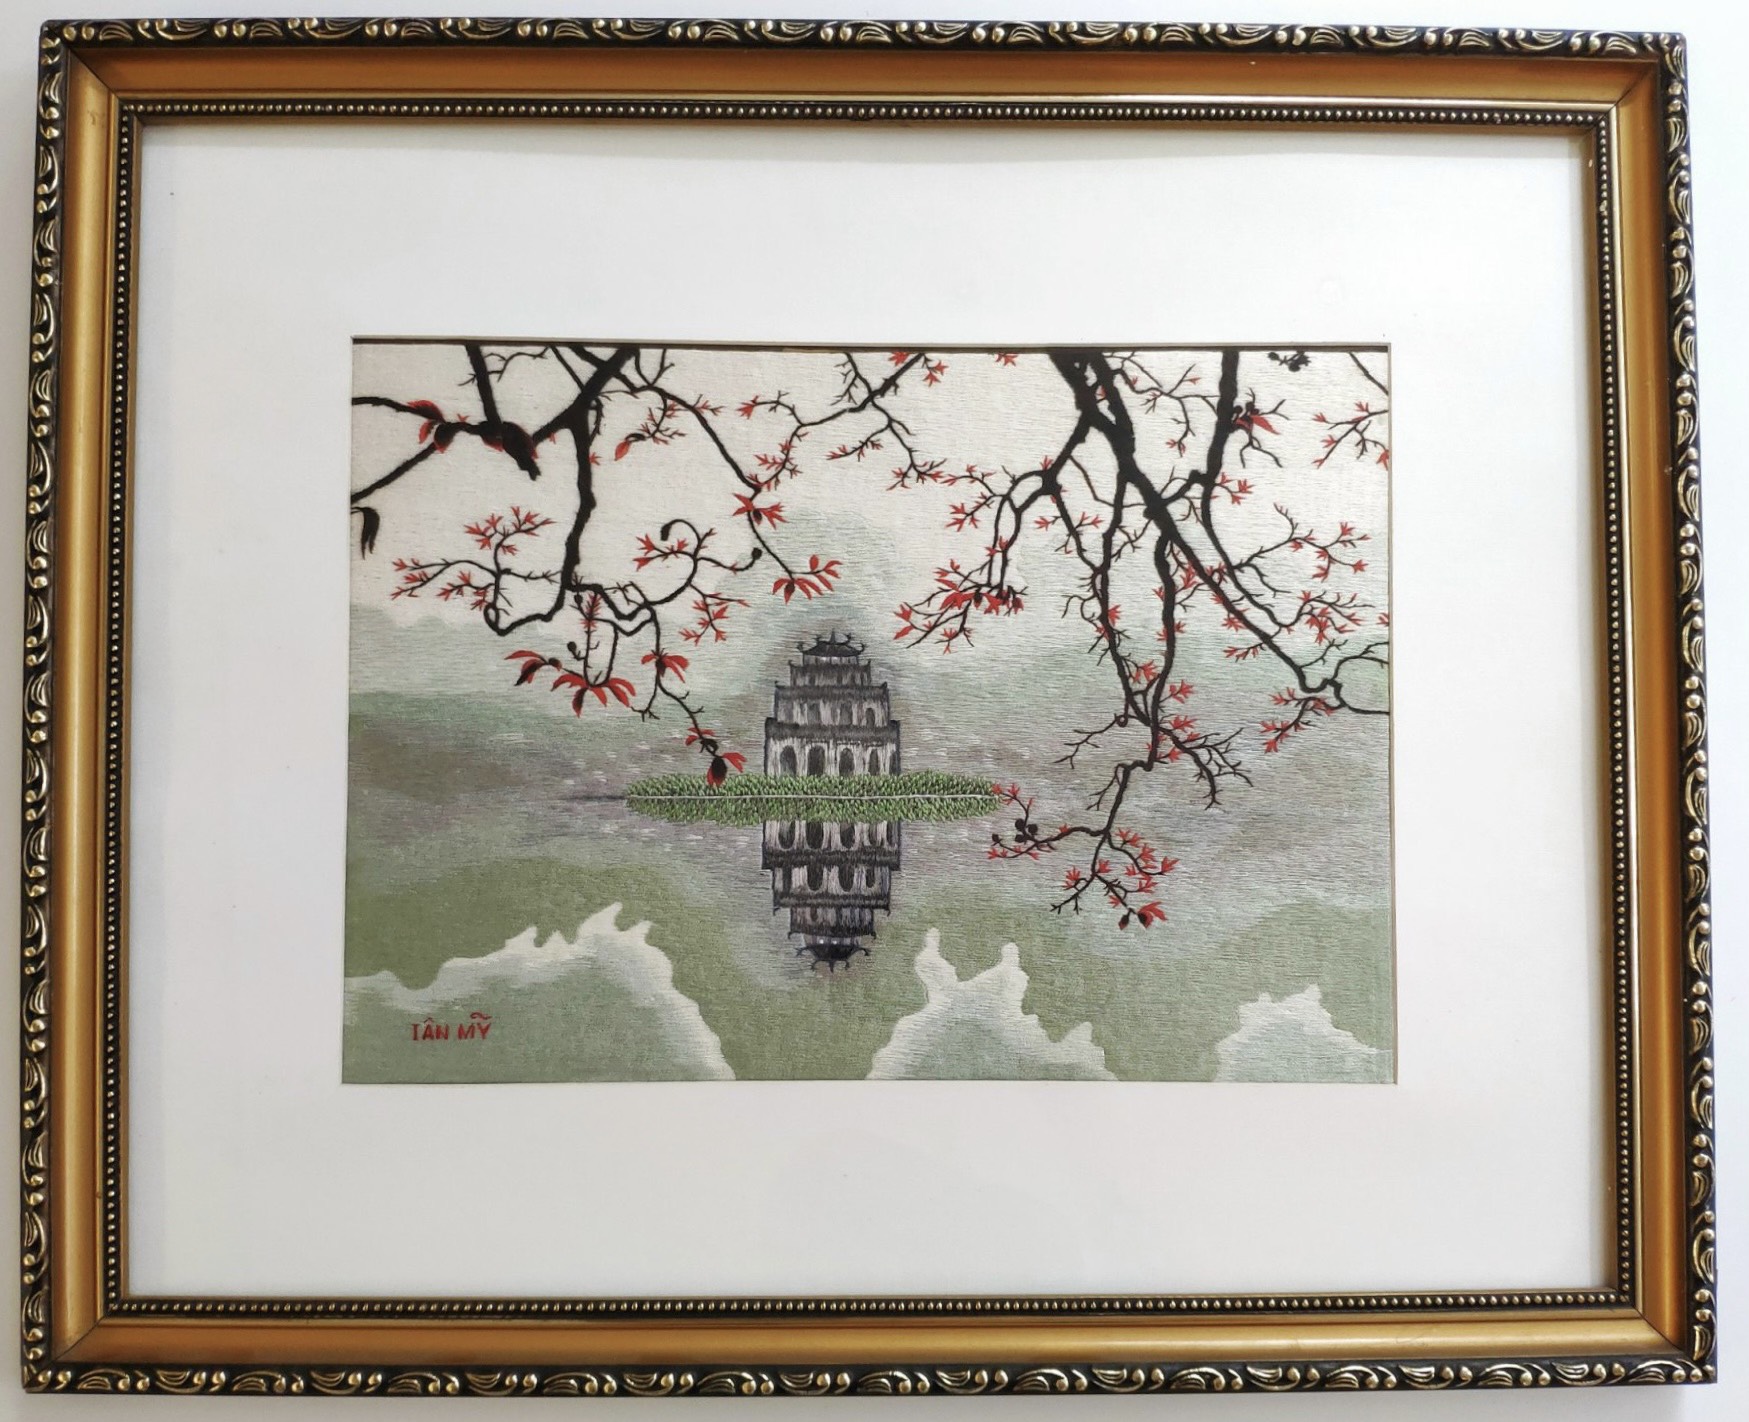 Hand-embroidered painting - Hoan Kiem lake (colour)